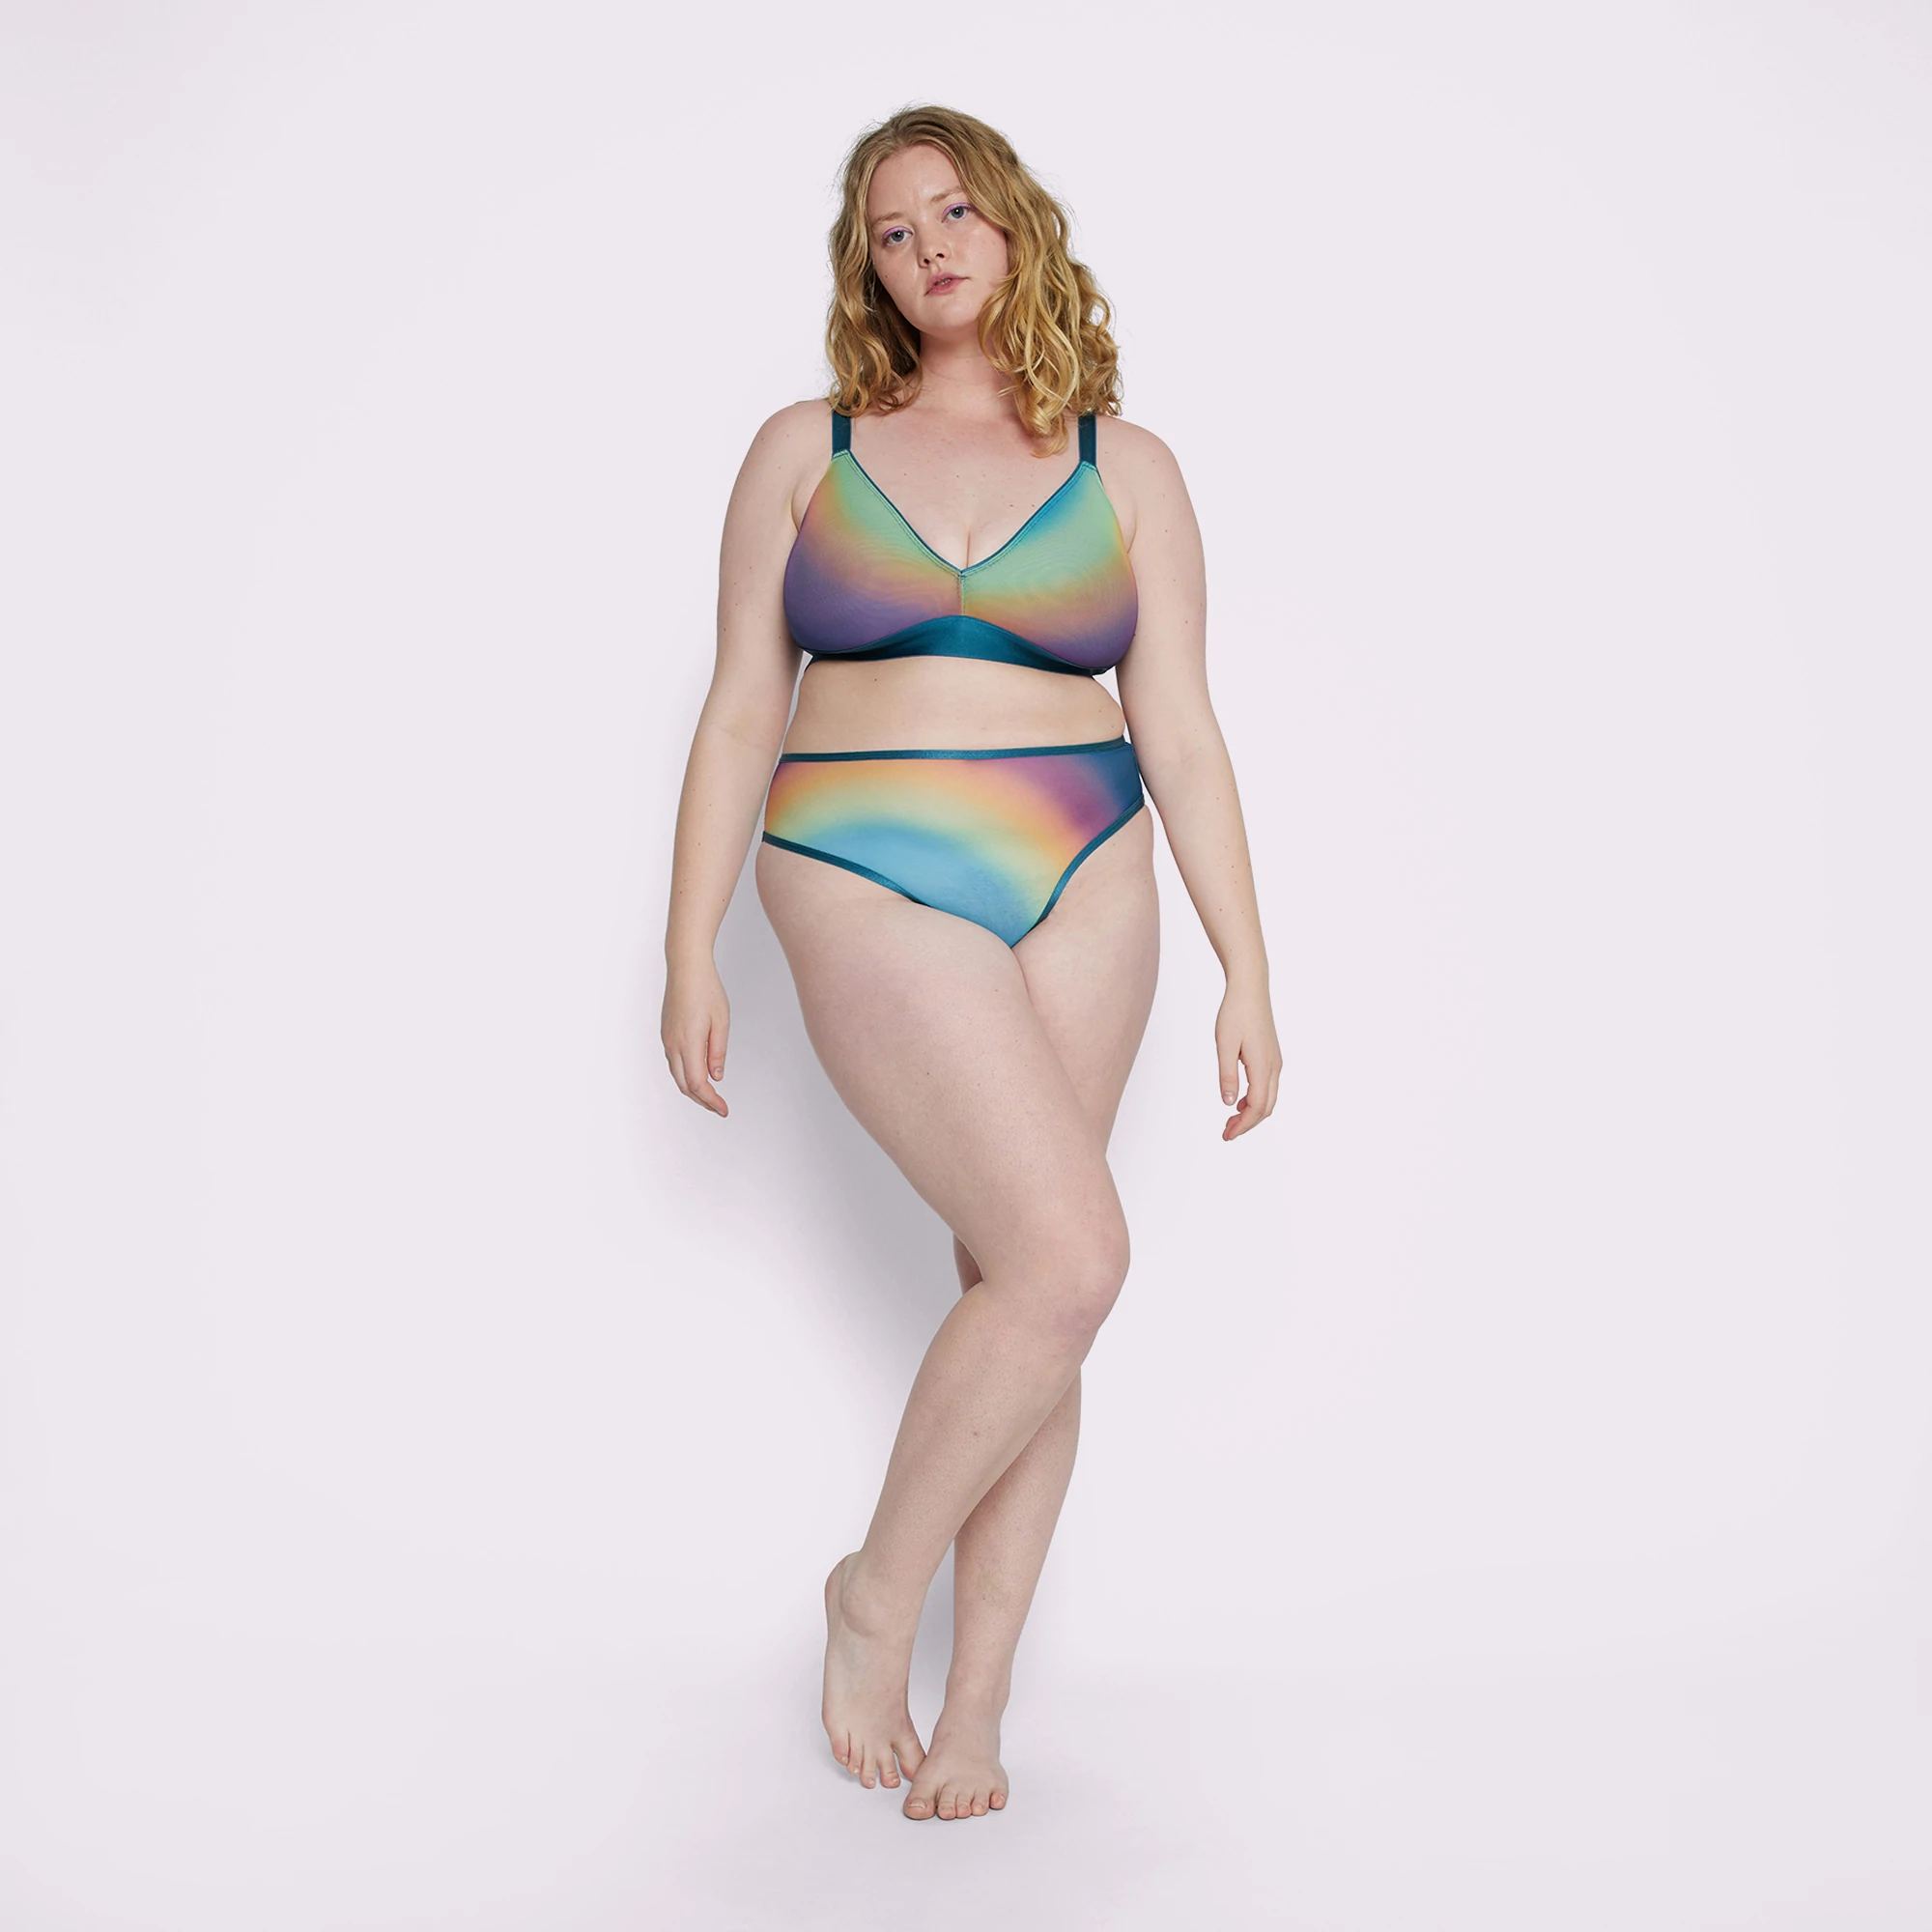 Of The Best Plus-Size Underwear Brands Reviews